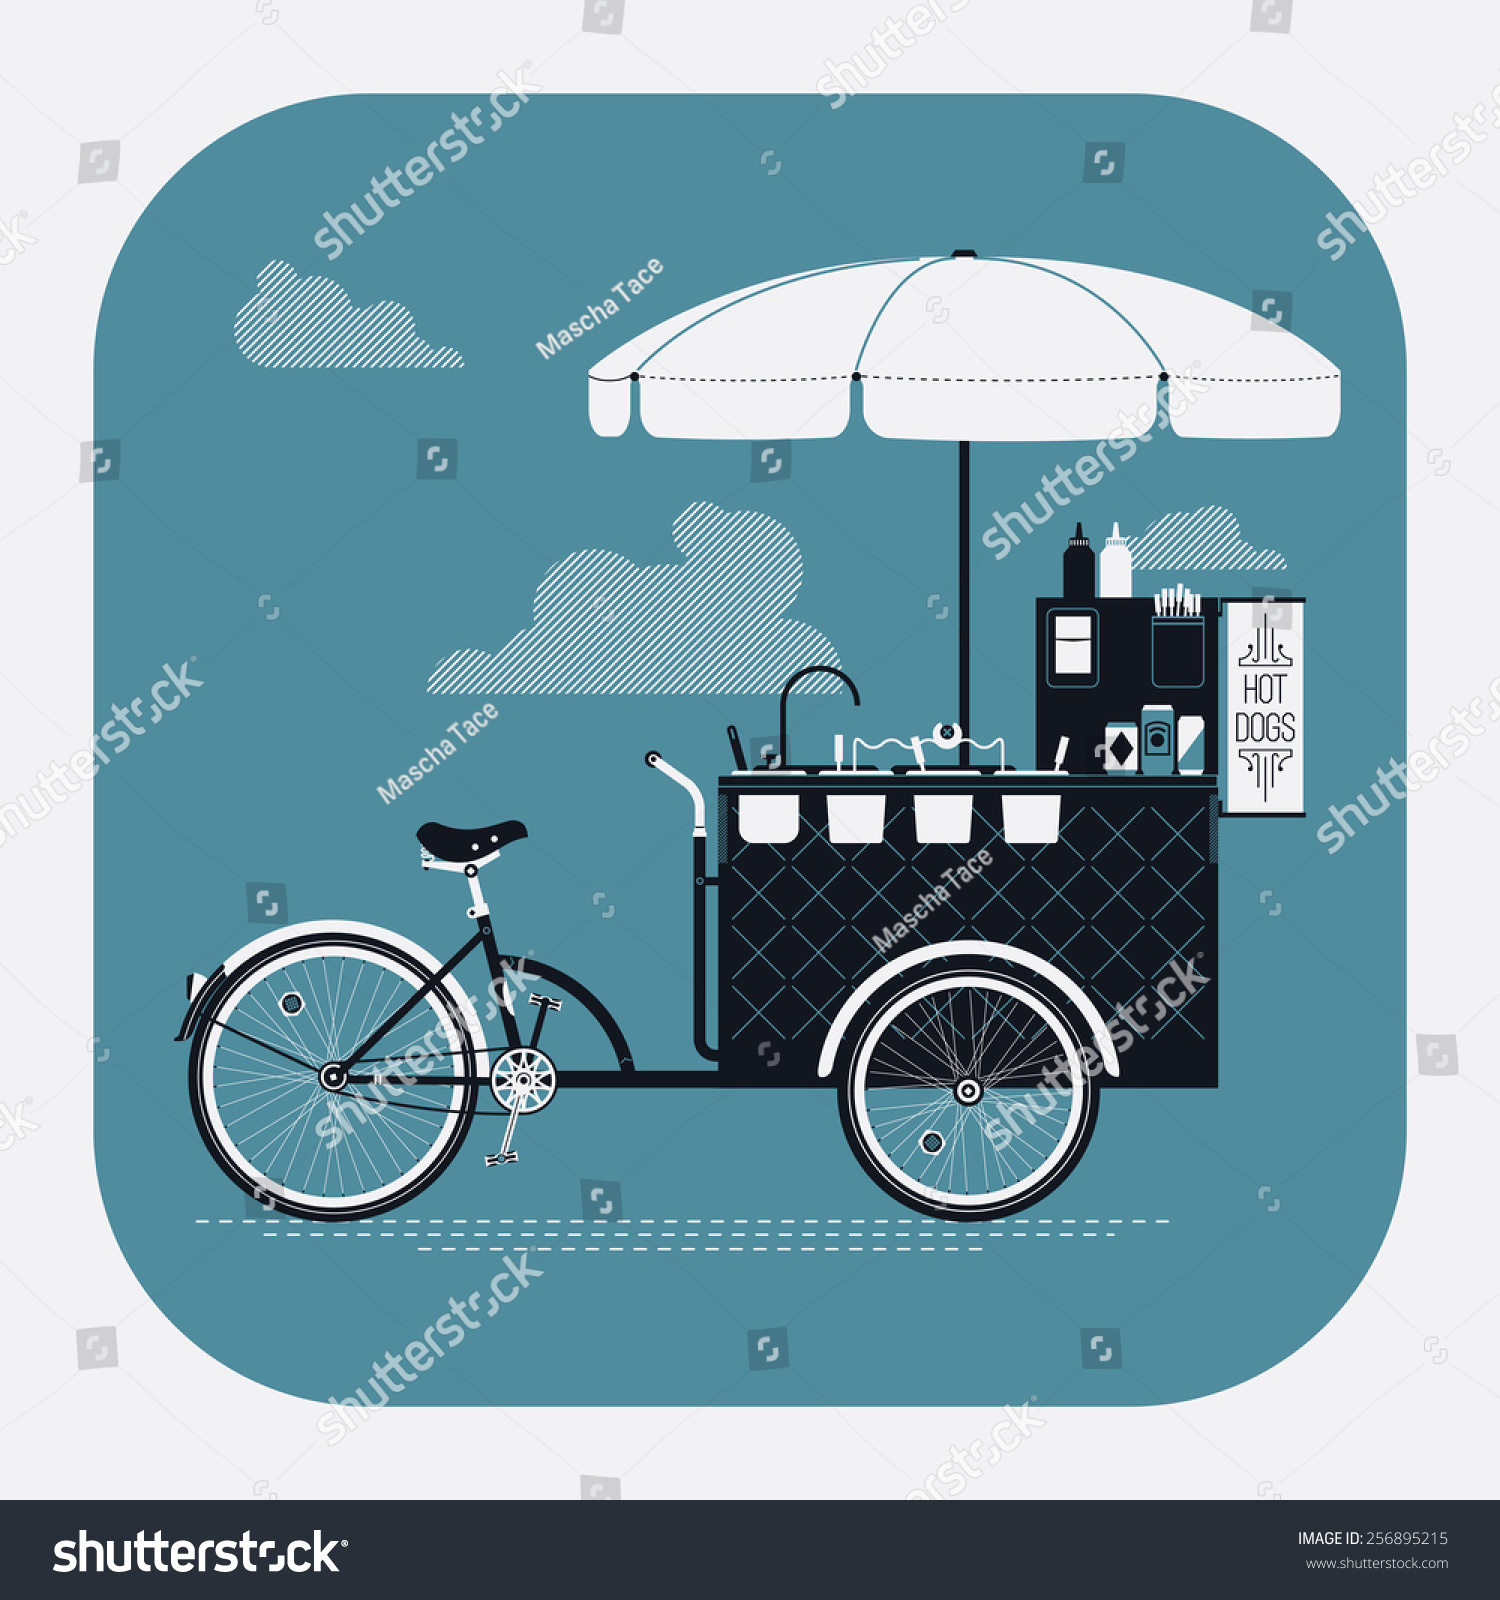 SVG of Cool detailed vector street food bicycle cart rounded corners web icon | Mobile retro bike powered hot dog stand with parasol sunshade, topping containers, ketchup and mustard bottles and more svg